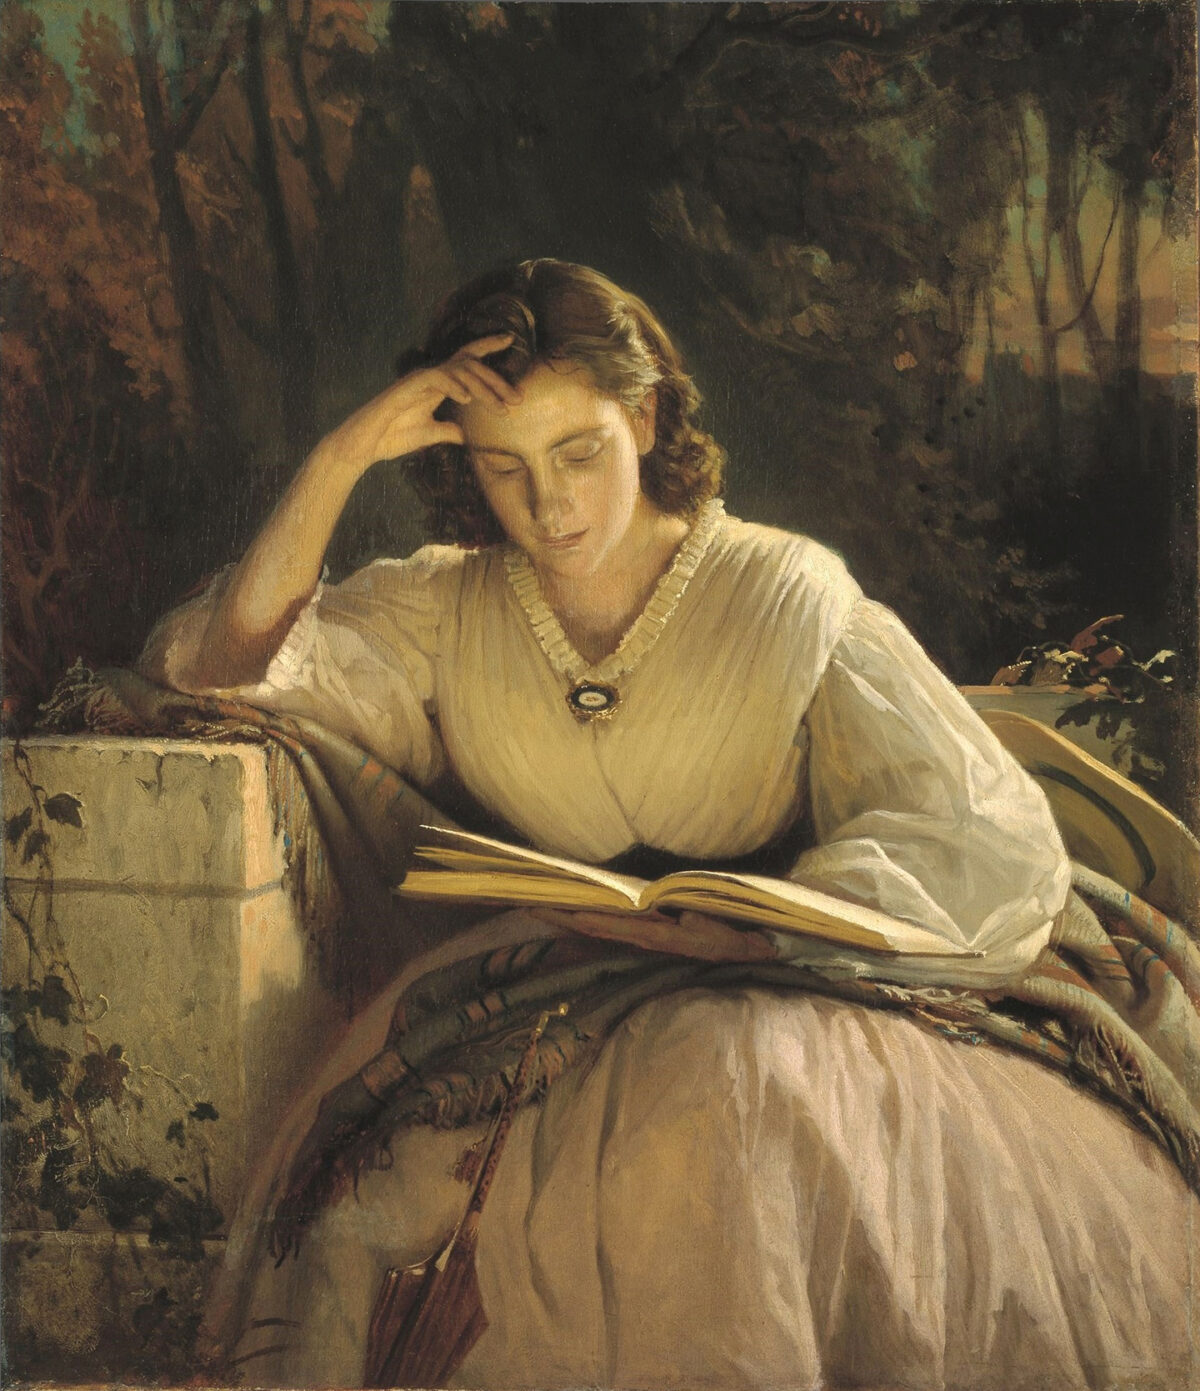 A detail from "Woman Reading," a portrait of Sofia Kramskaya, after 1866, by Ivan Kramskoi. Oil on canvas. Tretyakov Gallery, Moscow. (Public Domain)